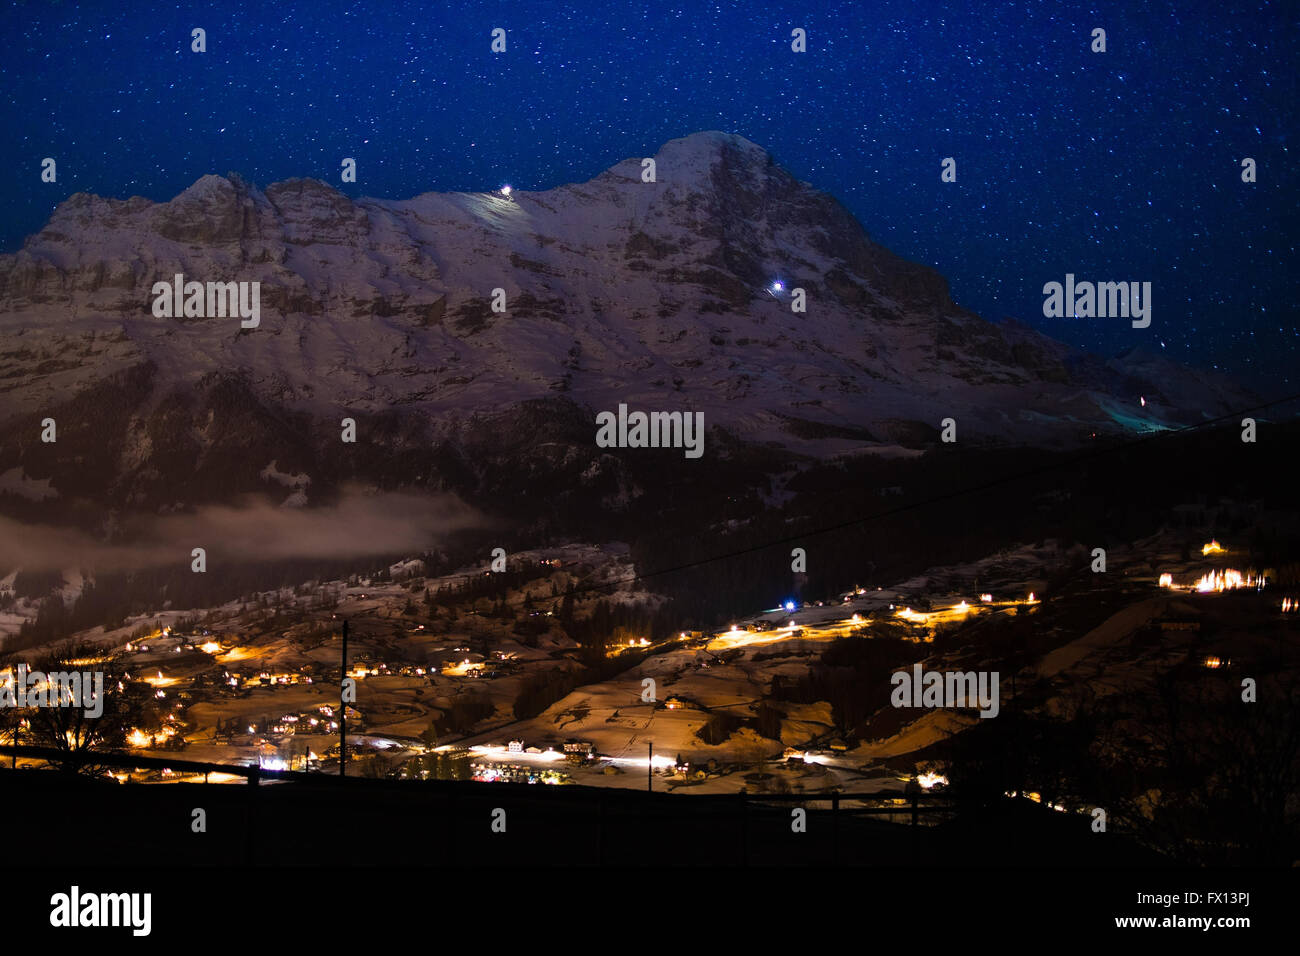 View of Eiger north face, Alps, Switzerland on clear starry night. Eiger Nordwand mountain in Swiss Bernese Alps Stock Photo